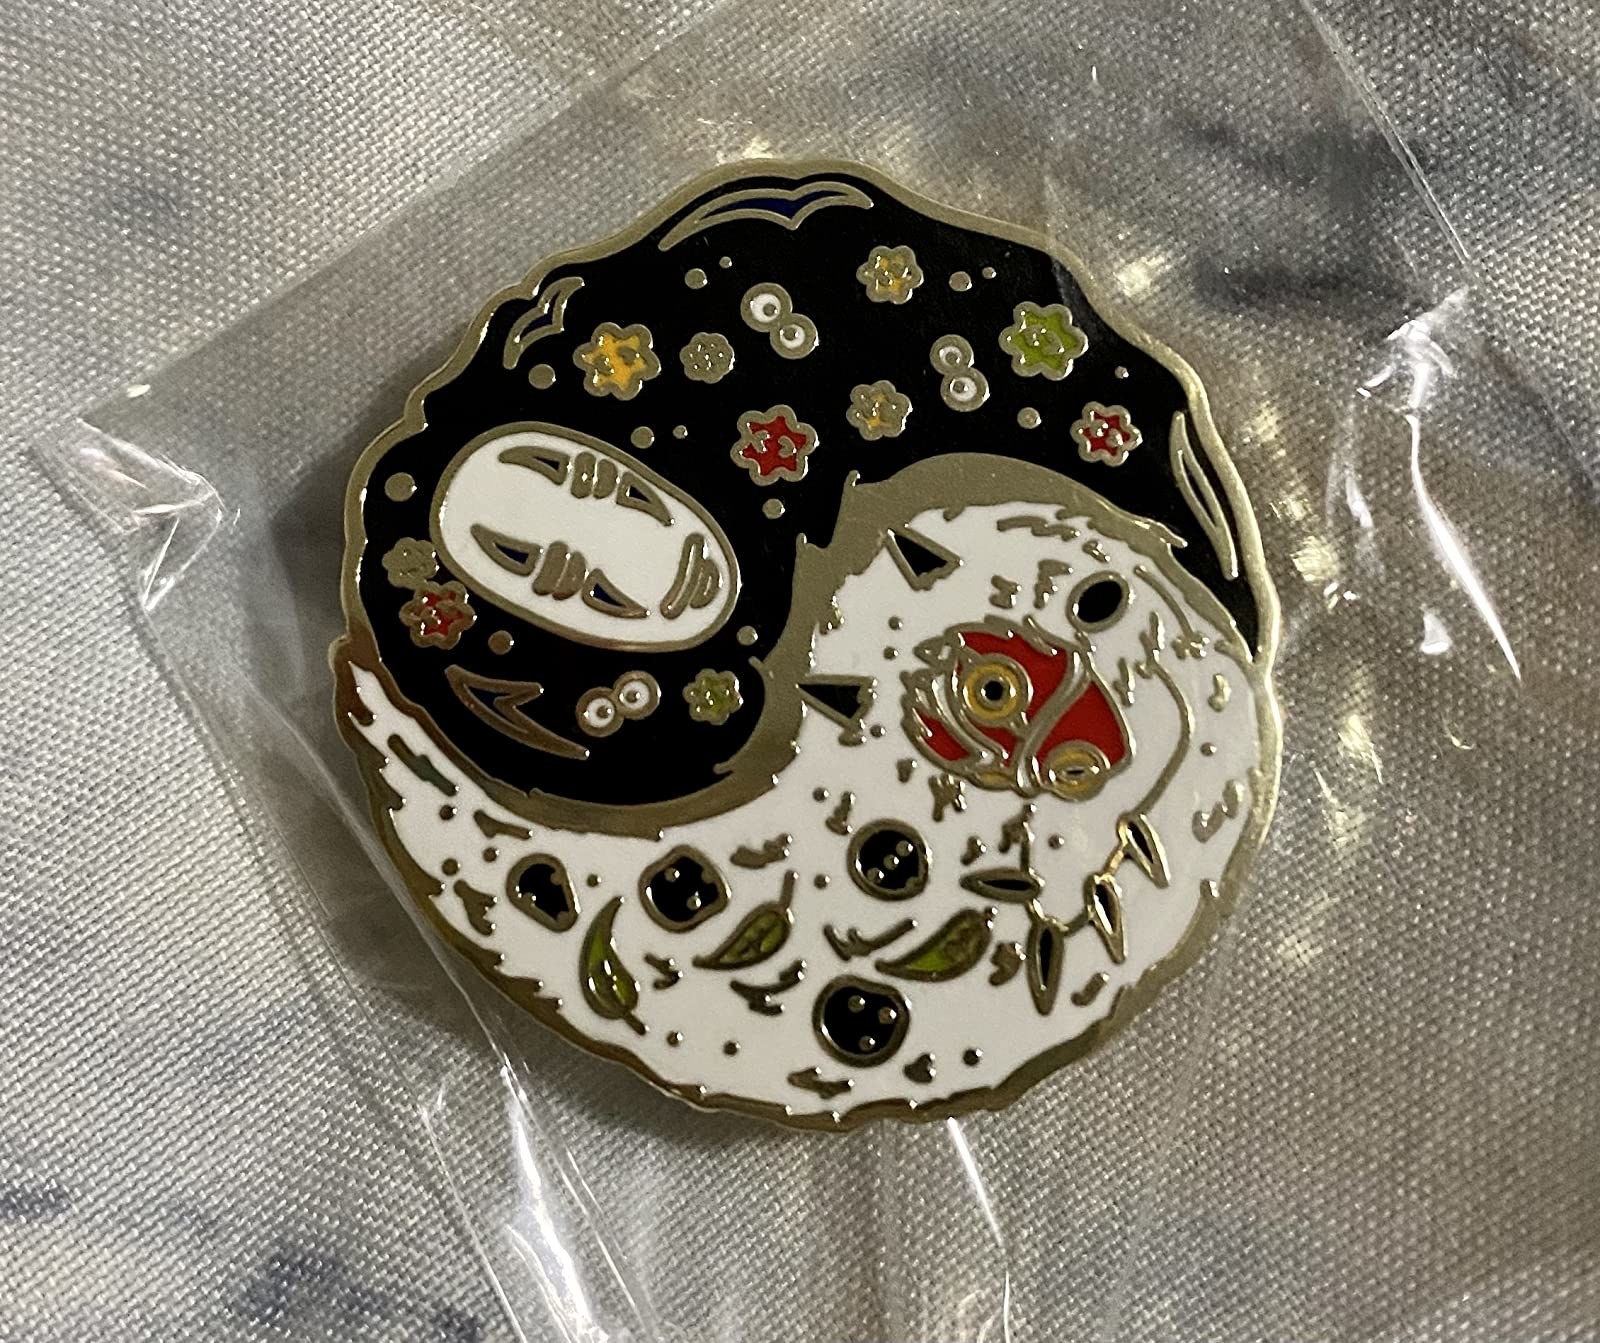 the round pin, with the black side featuring No Face and soot sprites and the white side featuring the Princess Mononoke mask and Kodama faces